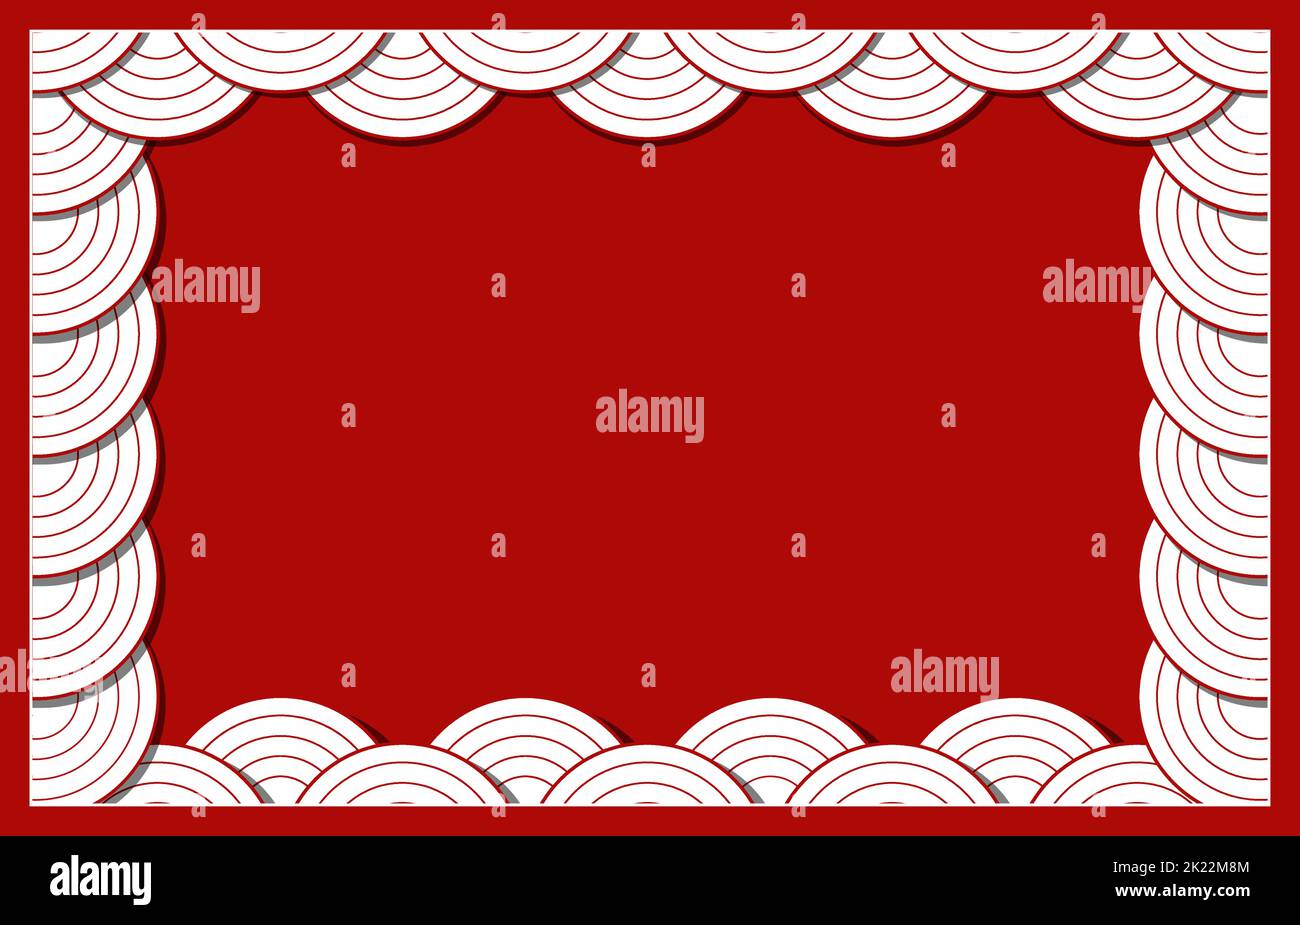 Vector design with red and white Japanese wavy background. Decorative frame with copy space for text. Template for greeting cards and banners about ce Stock Vector